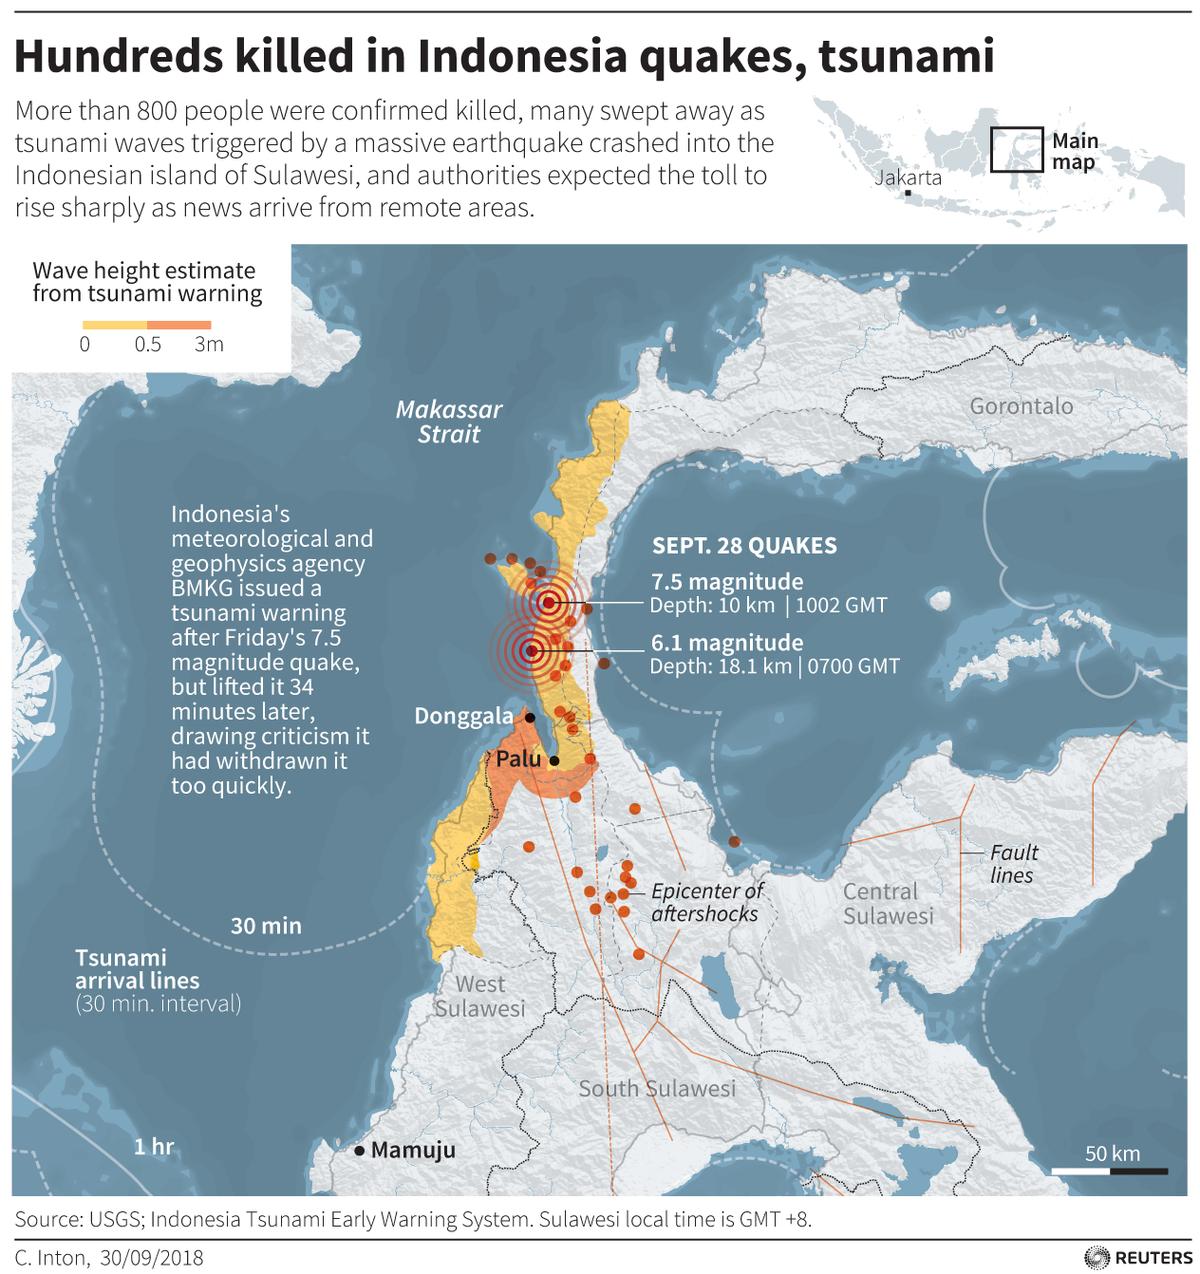 More than 800 people were confirmed killed, many swept away as tsunami waves triggered by a massive earthquake crashed into the Indonesian Island of Sulawesi, and authorities expected the toll to rise sharply as news arrives from remote areas. (USGS, Indonesia Tsunami Early Warning System/Reuters)